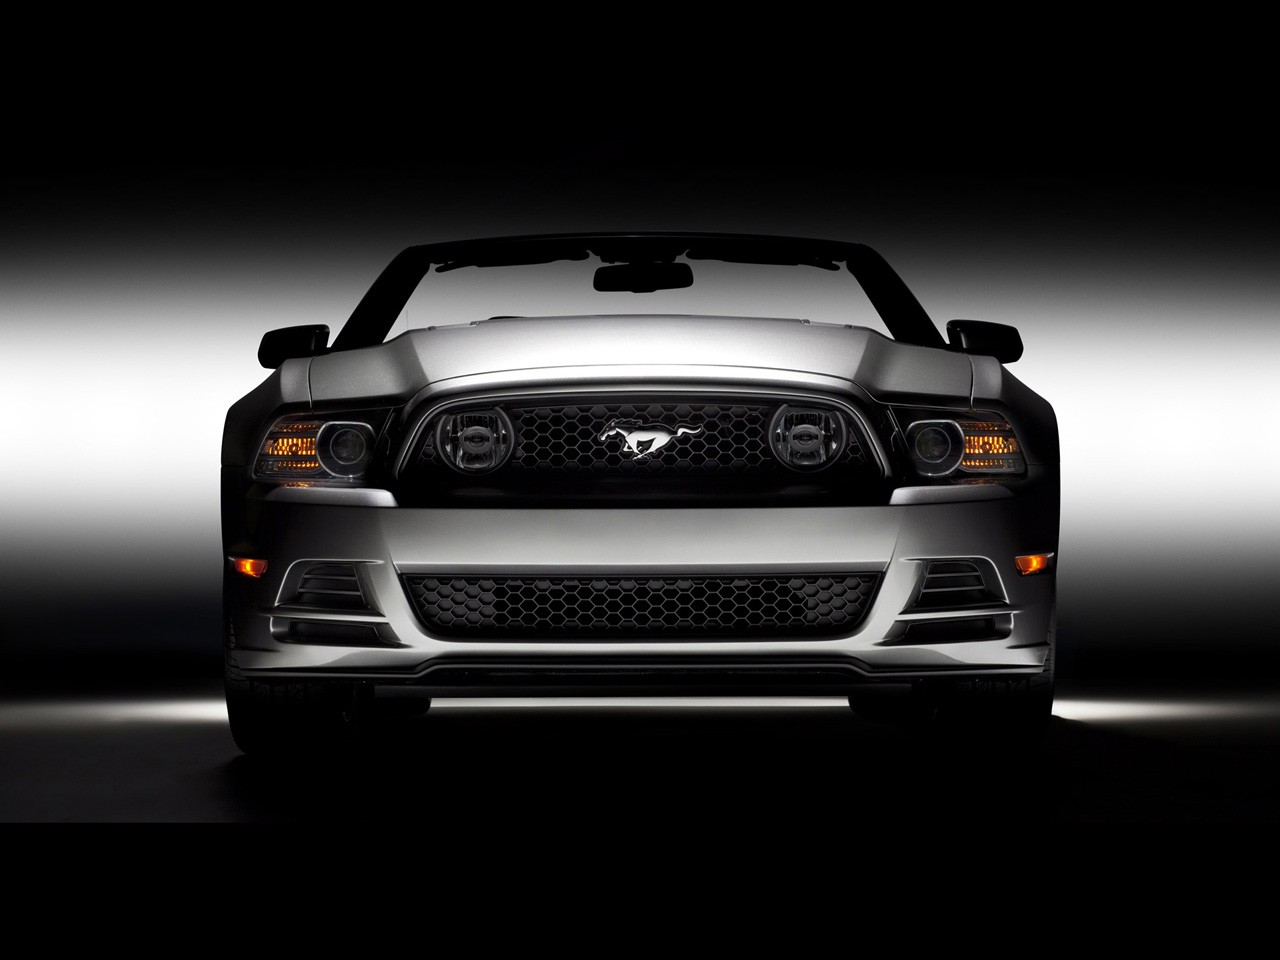 Ford Mustang Gt Wallpaper 4660 Hd Wallpapers in Cars   Imagescicom 1280x960